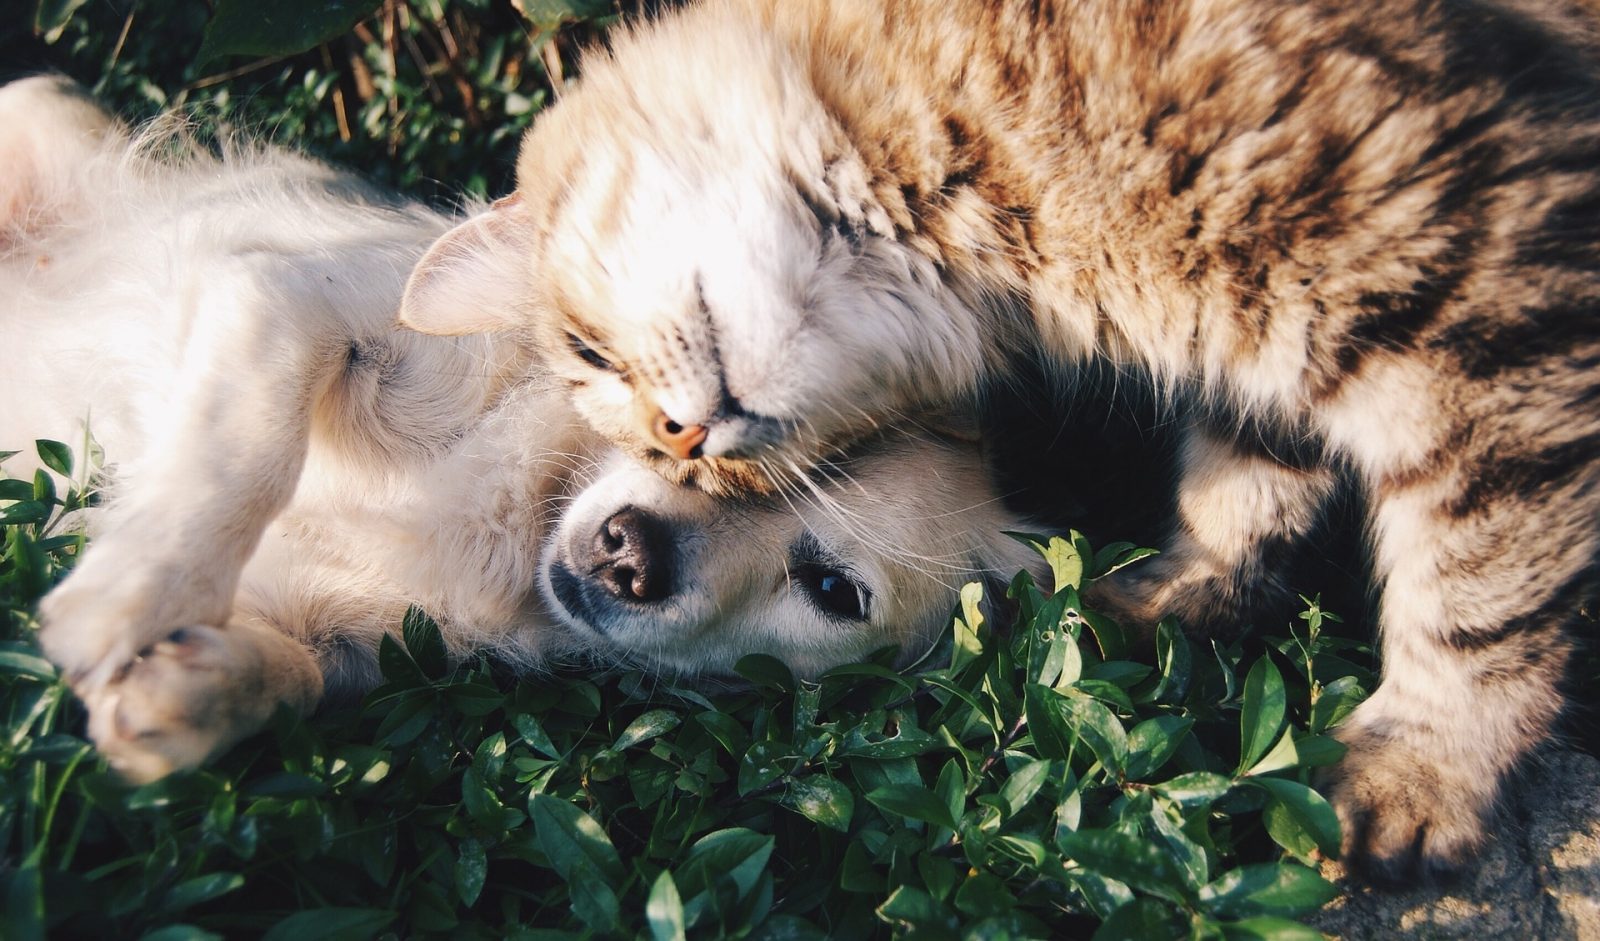 a tabby cat playing nicely with a golden retriever puppy